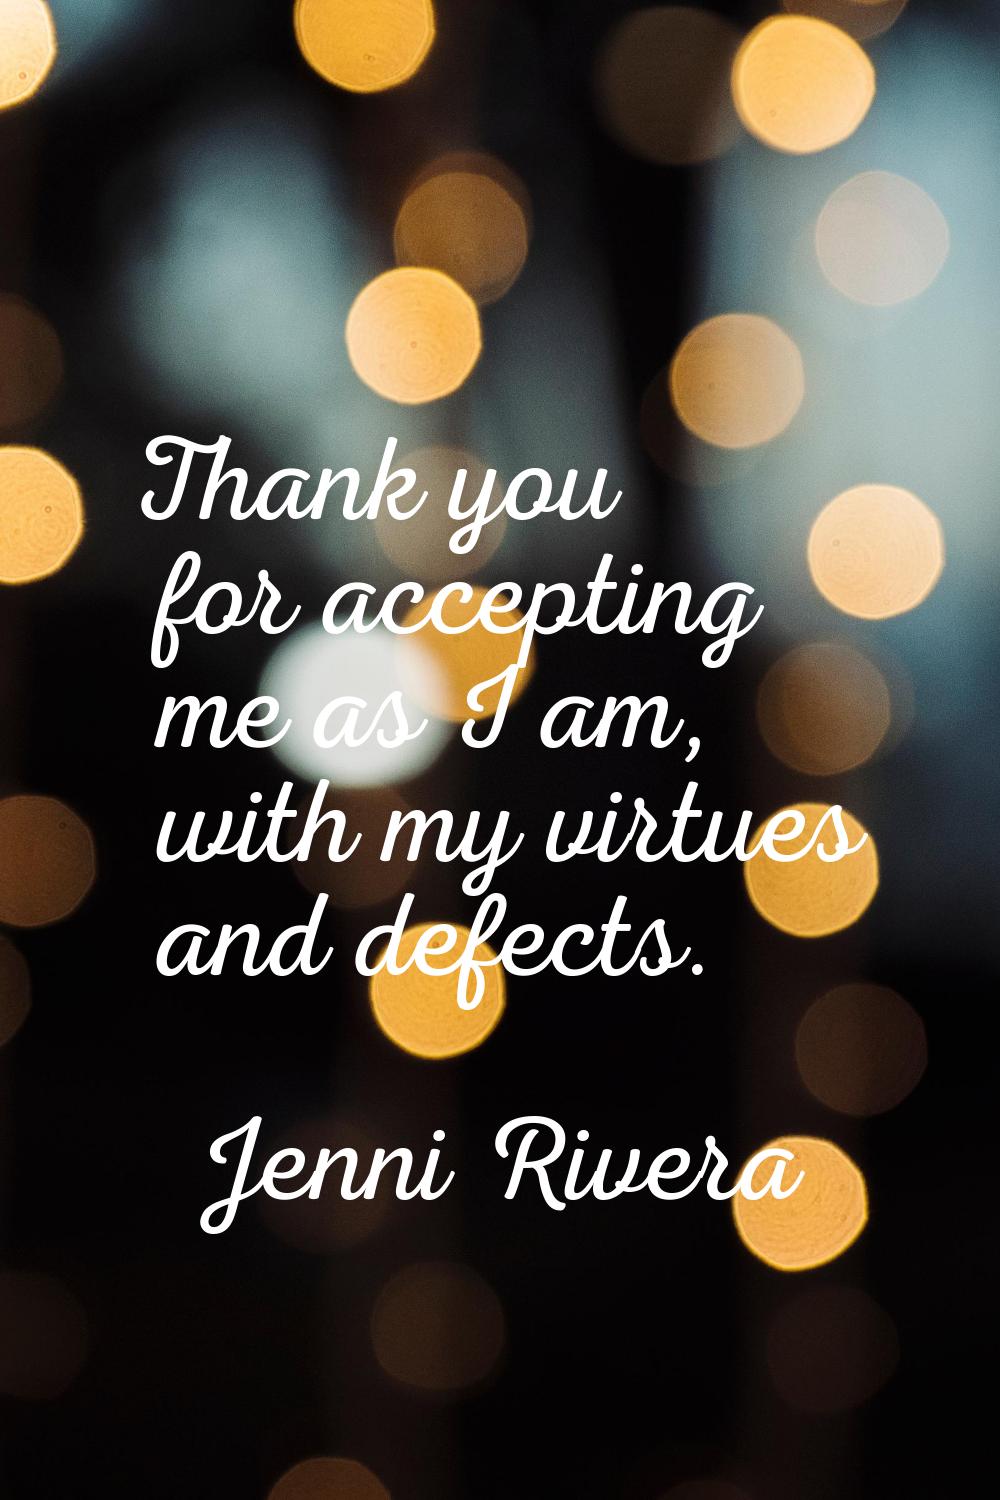 Thank you for accepting me as I am, with my virtues and defects.